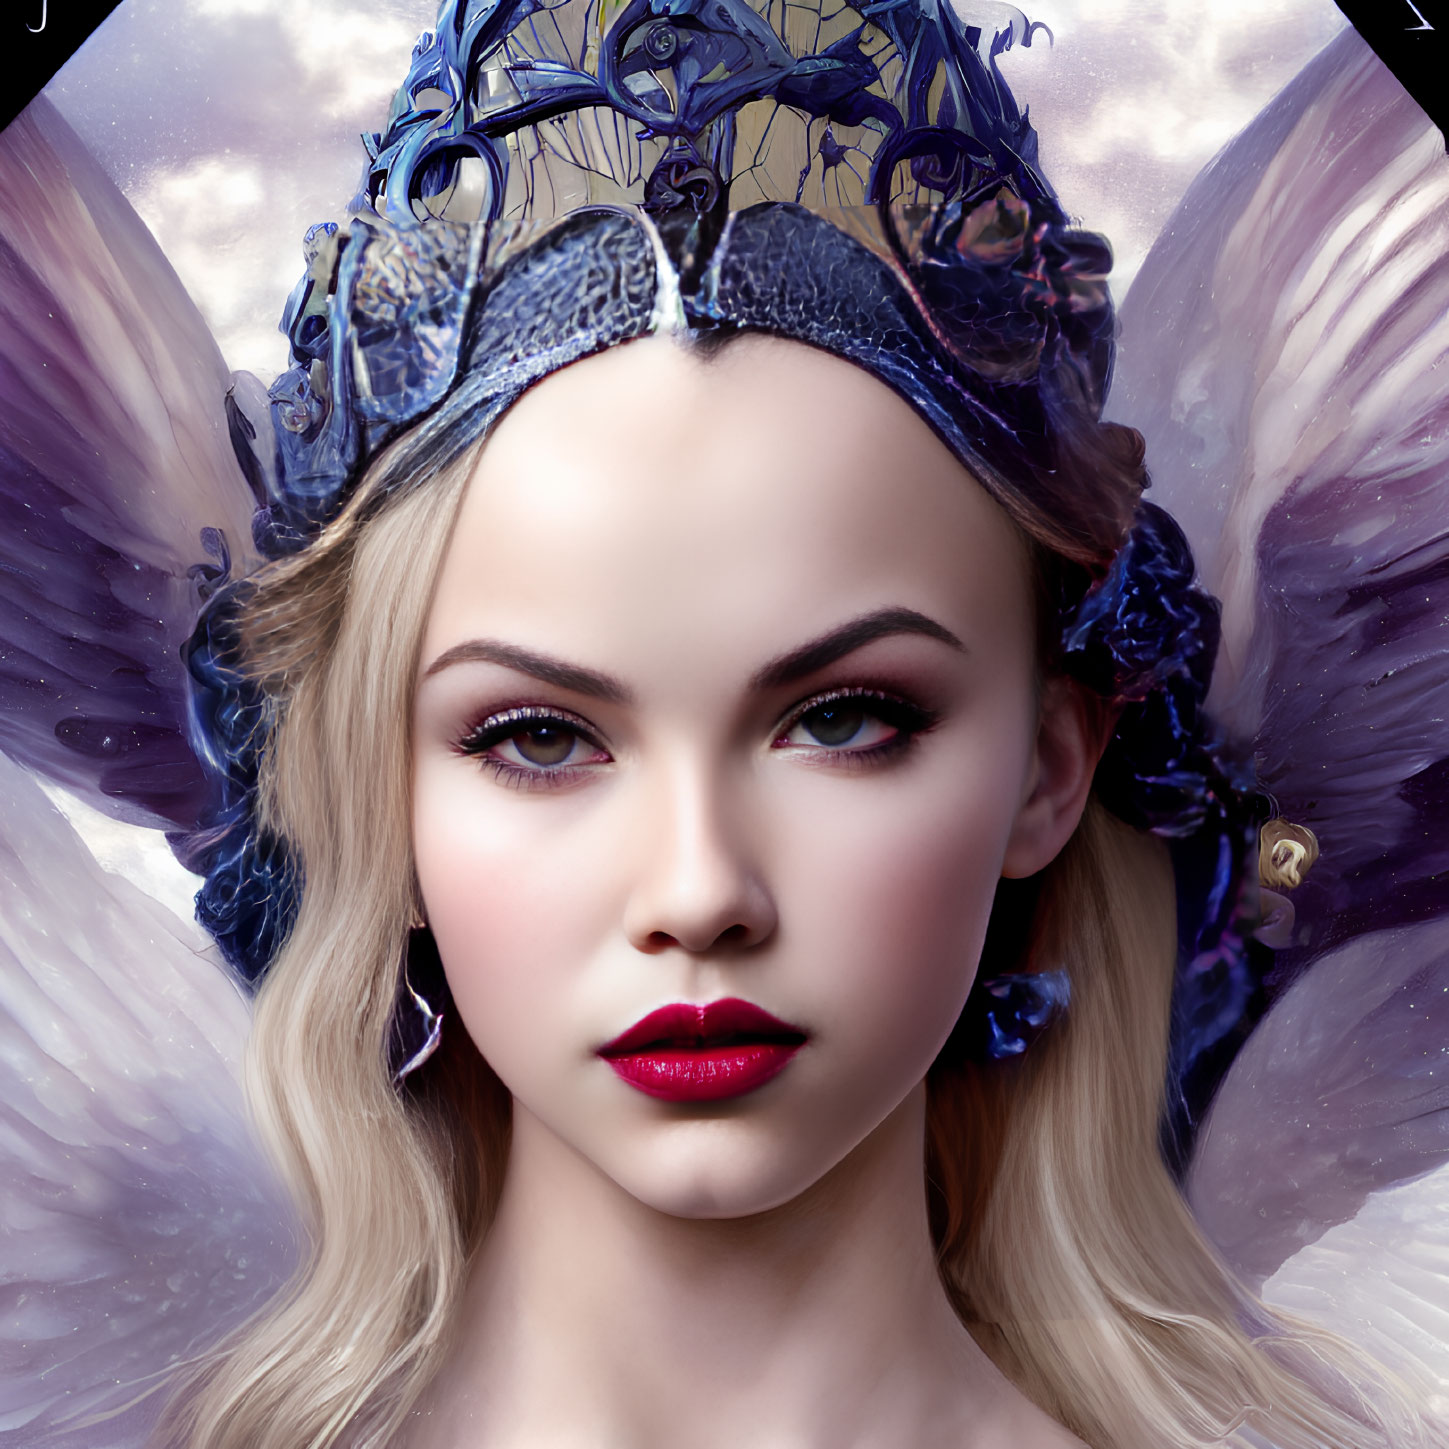 Digital artwork: Woman with butterfly wings, decorative headdress, and fantasy makeup.